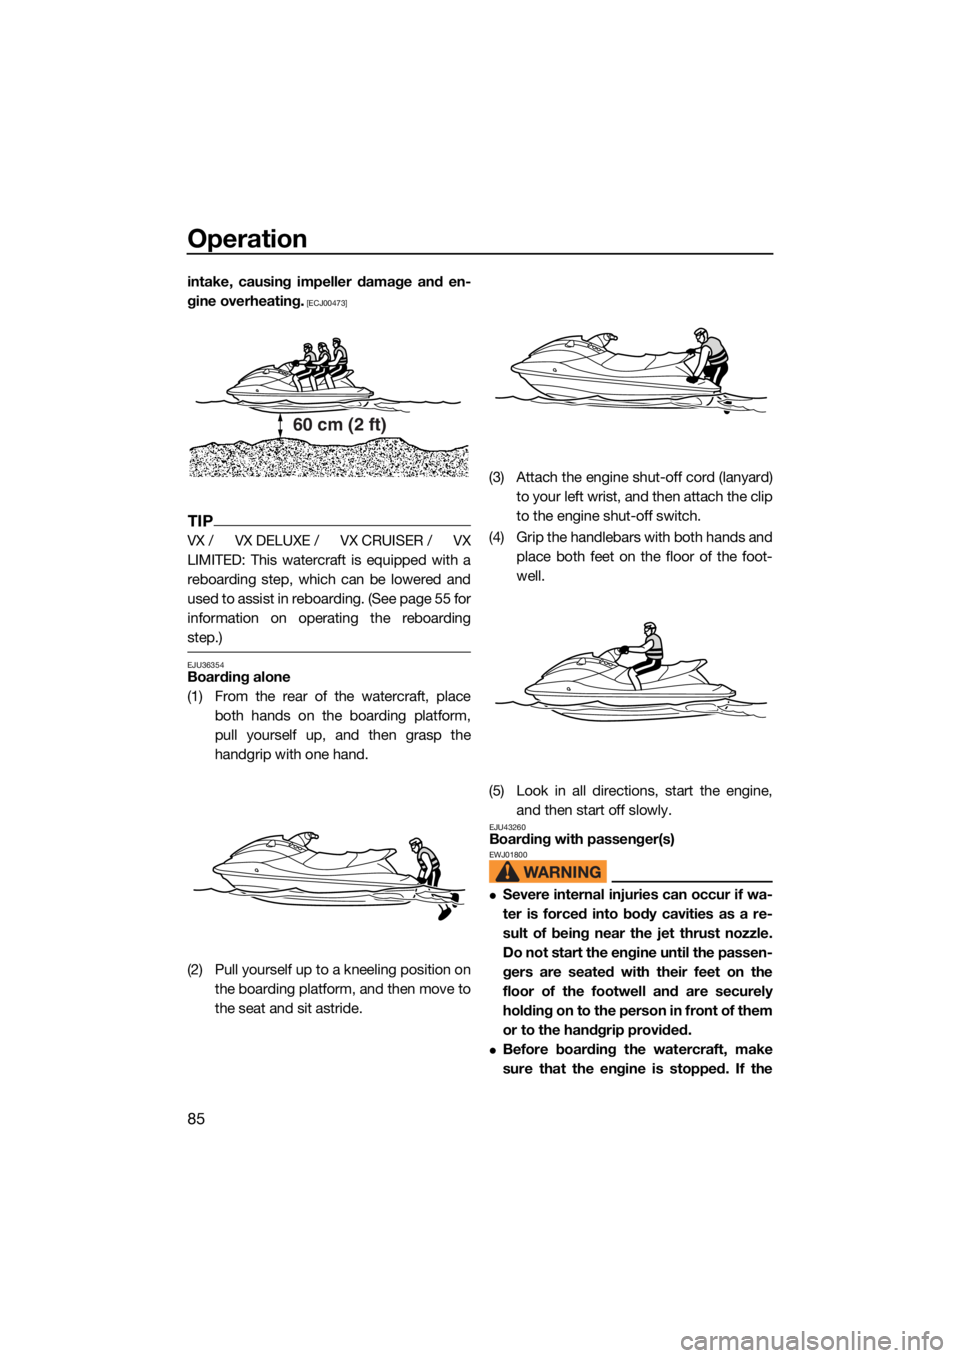 YAMAHA VX CRUISER 2022  Owners Manual Operation
85
intake, causing impeller damage and en-
gine overheating.
 [ECJ00473]
TIP
VX / VX DELUXE / VX CRUISER / VX
LIMITED: This watercraft is equipped with a reboarding step, which can be lowere